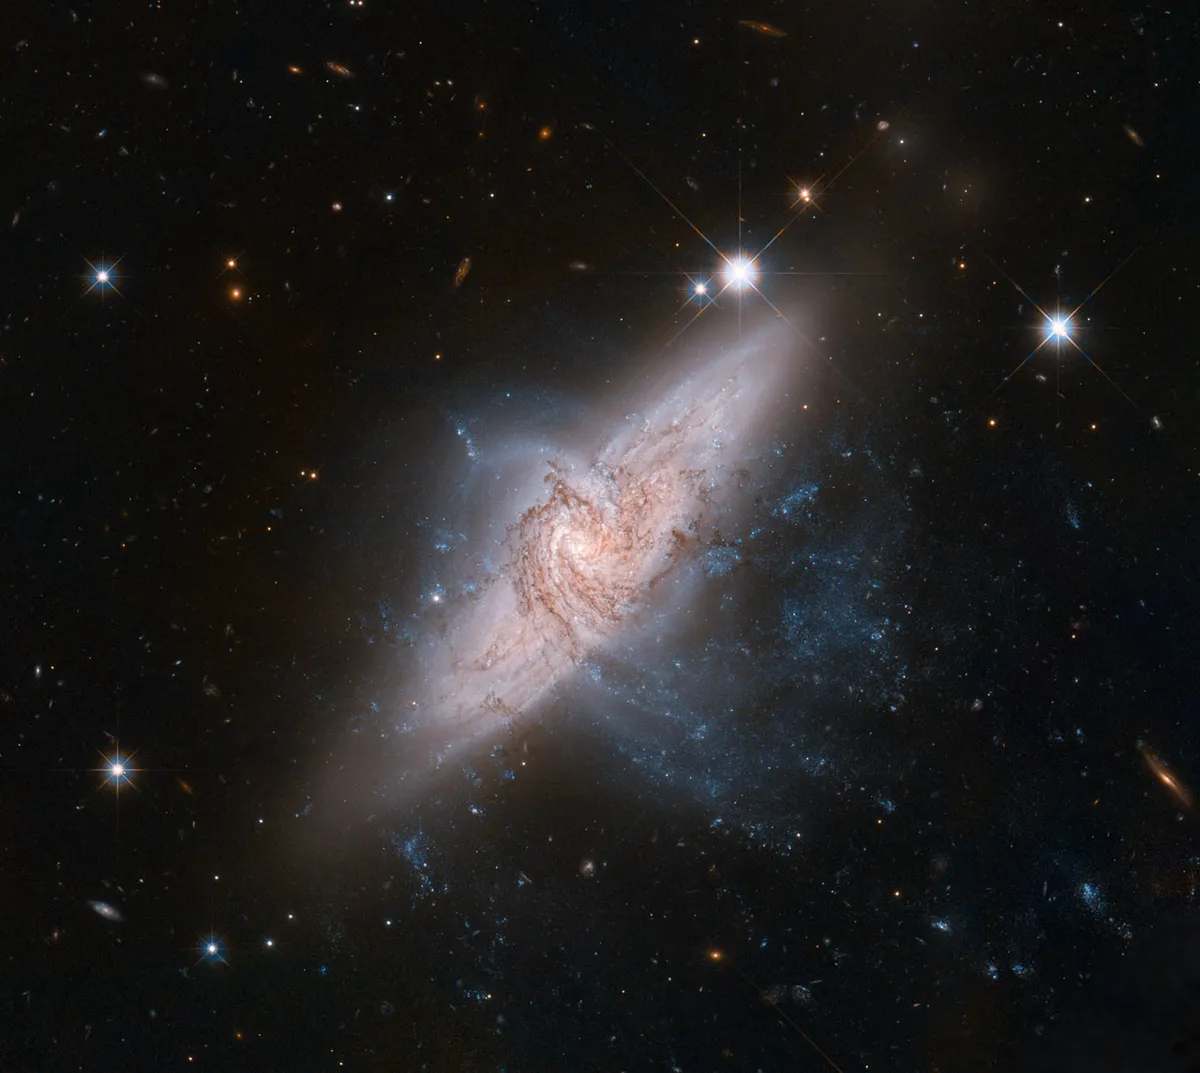 A pair of ‘overlapping’ galaxies called NGC 3314. Credit: NASA, ESA, the Hubble Heritage (STScI/AURA)-ESA/Hubble Collaboration, and W. Keel (University of Alabama)